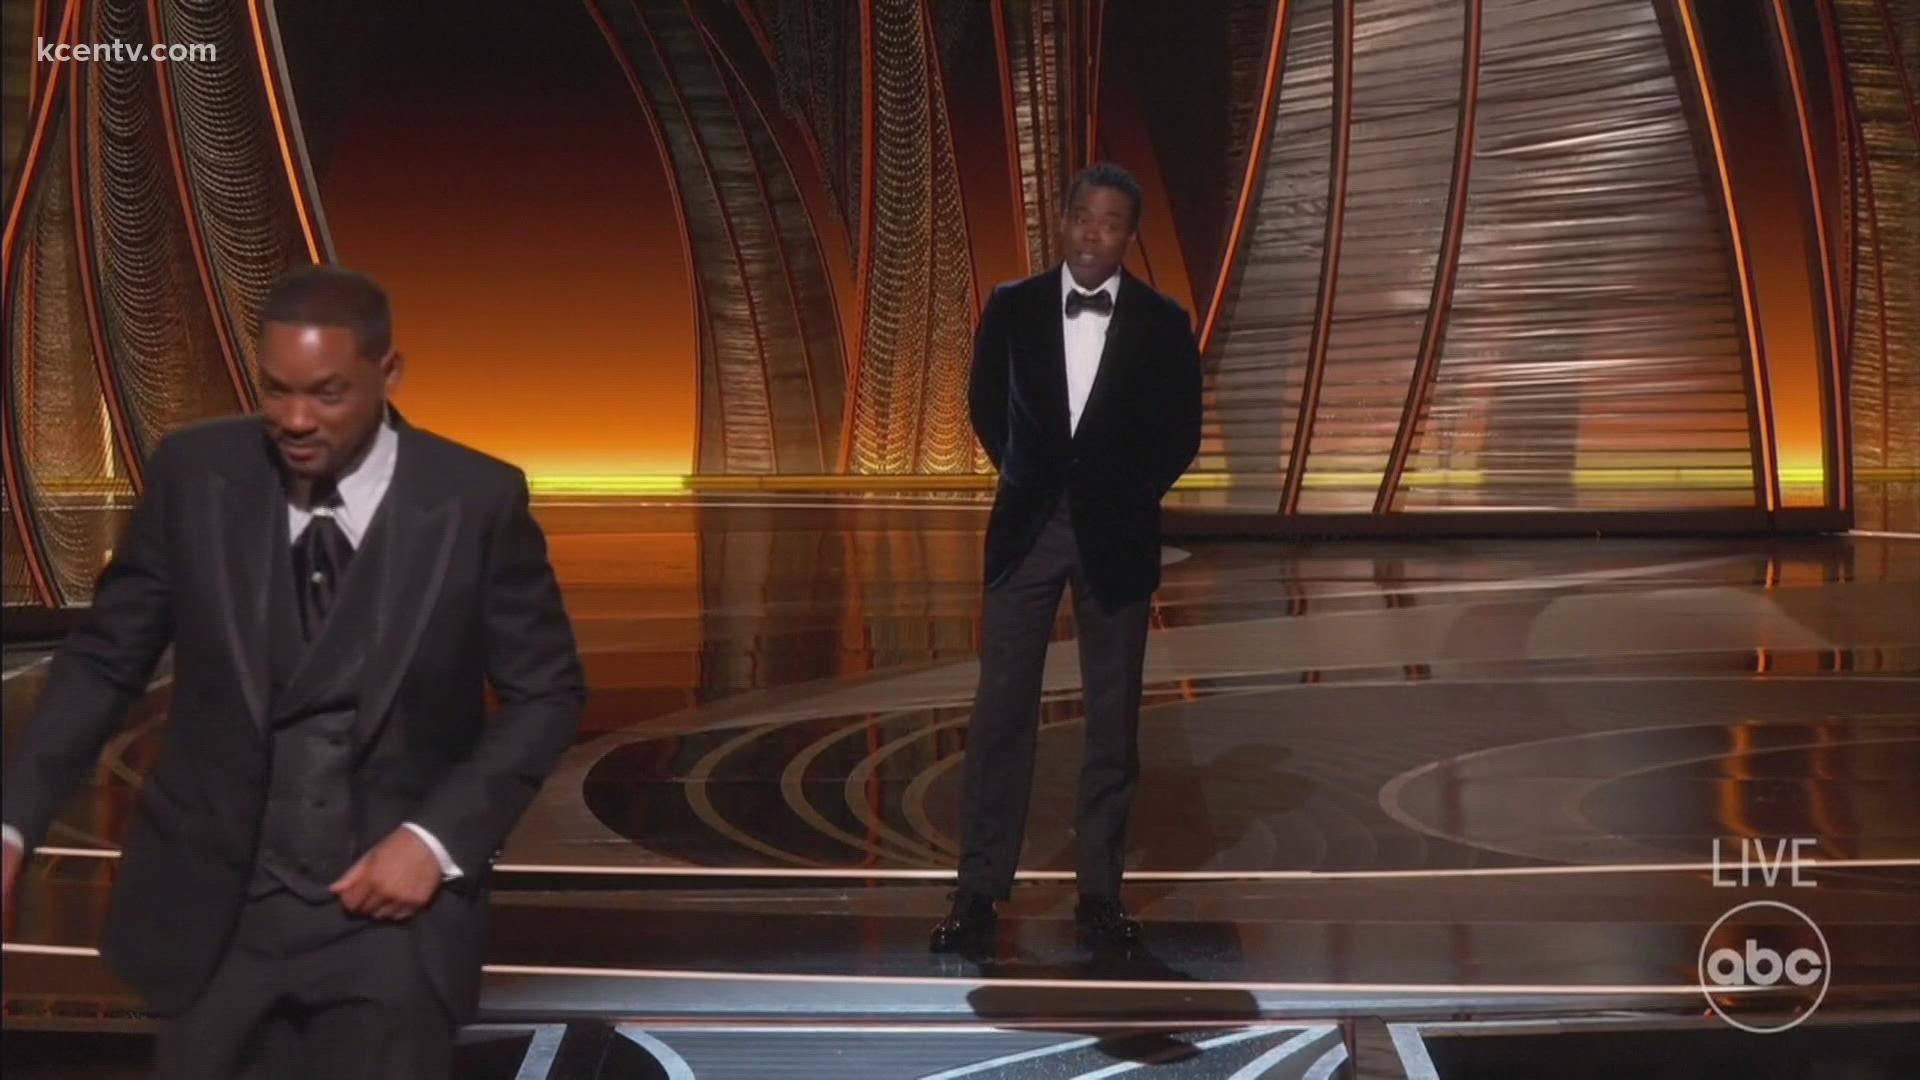 Last night may have been one of the most shocking moments in the Academy Awards history.